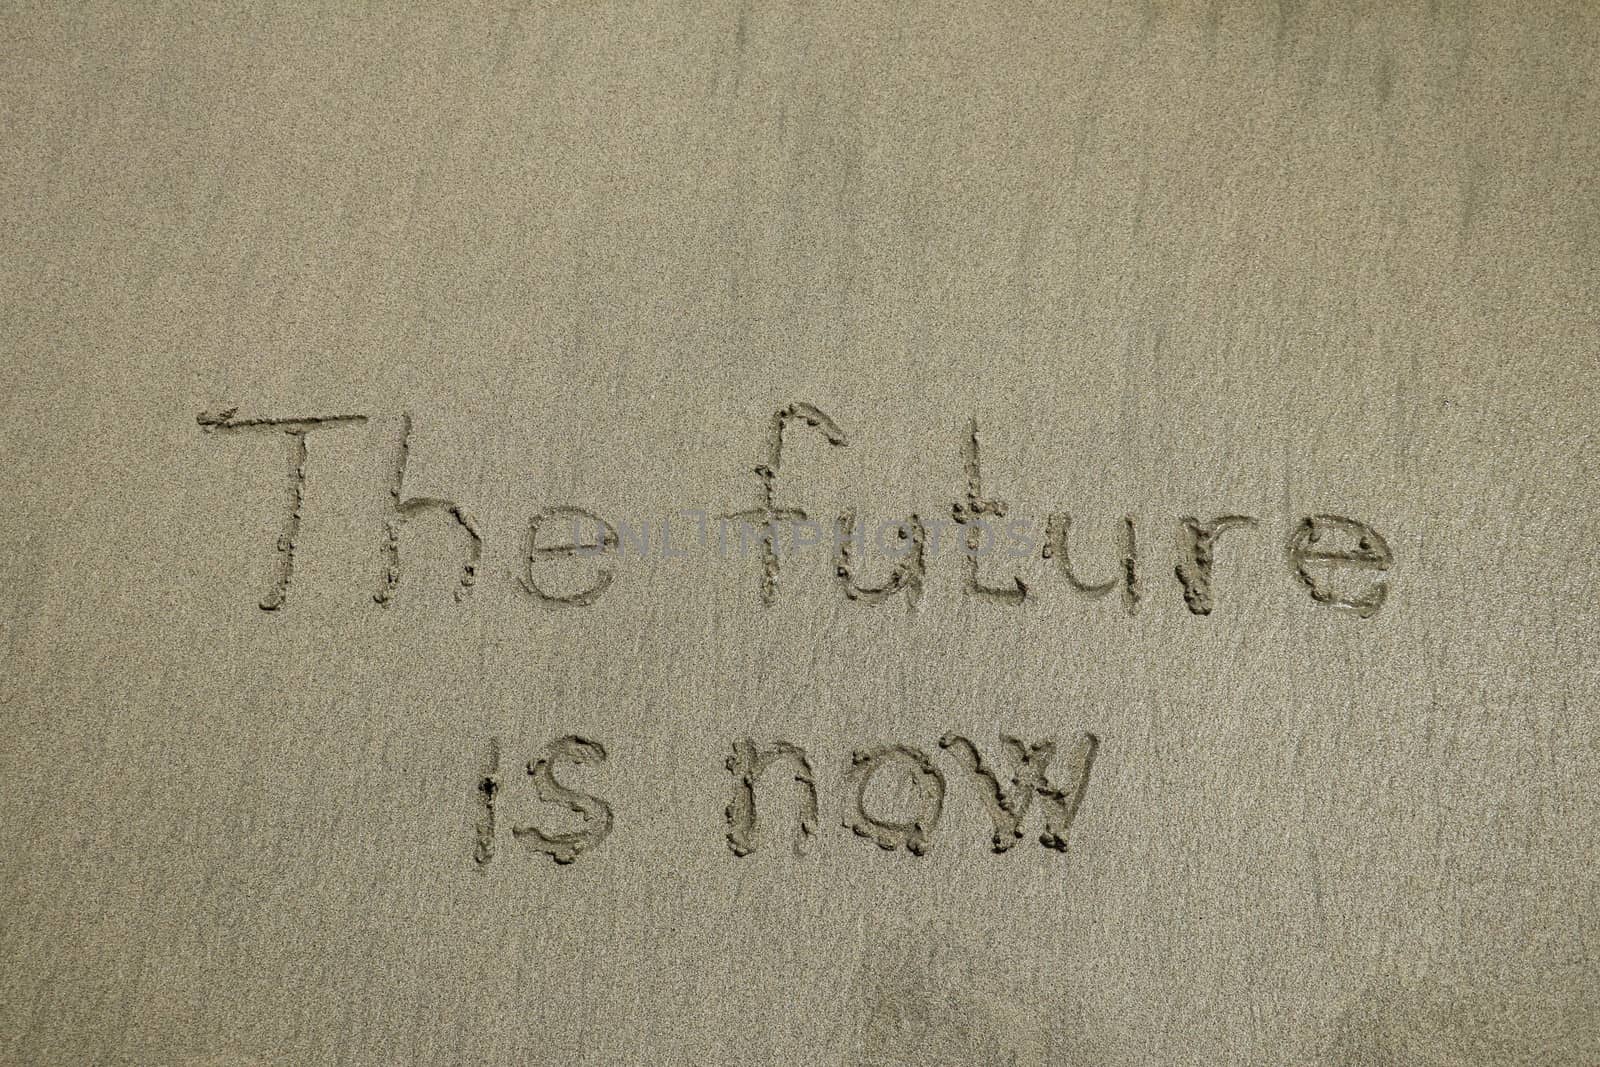 The future is now, innovative technology concept text written on sand.